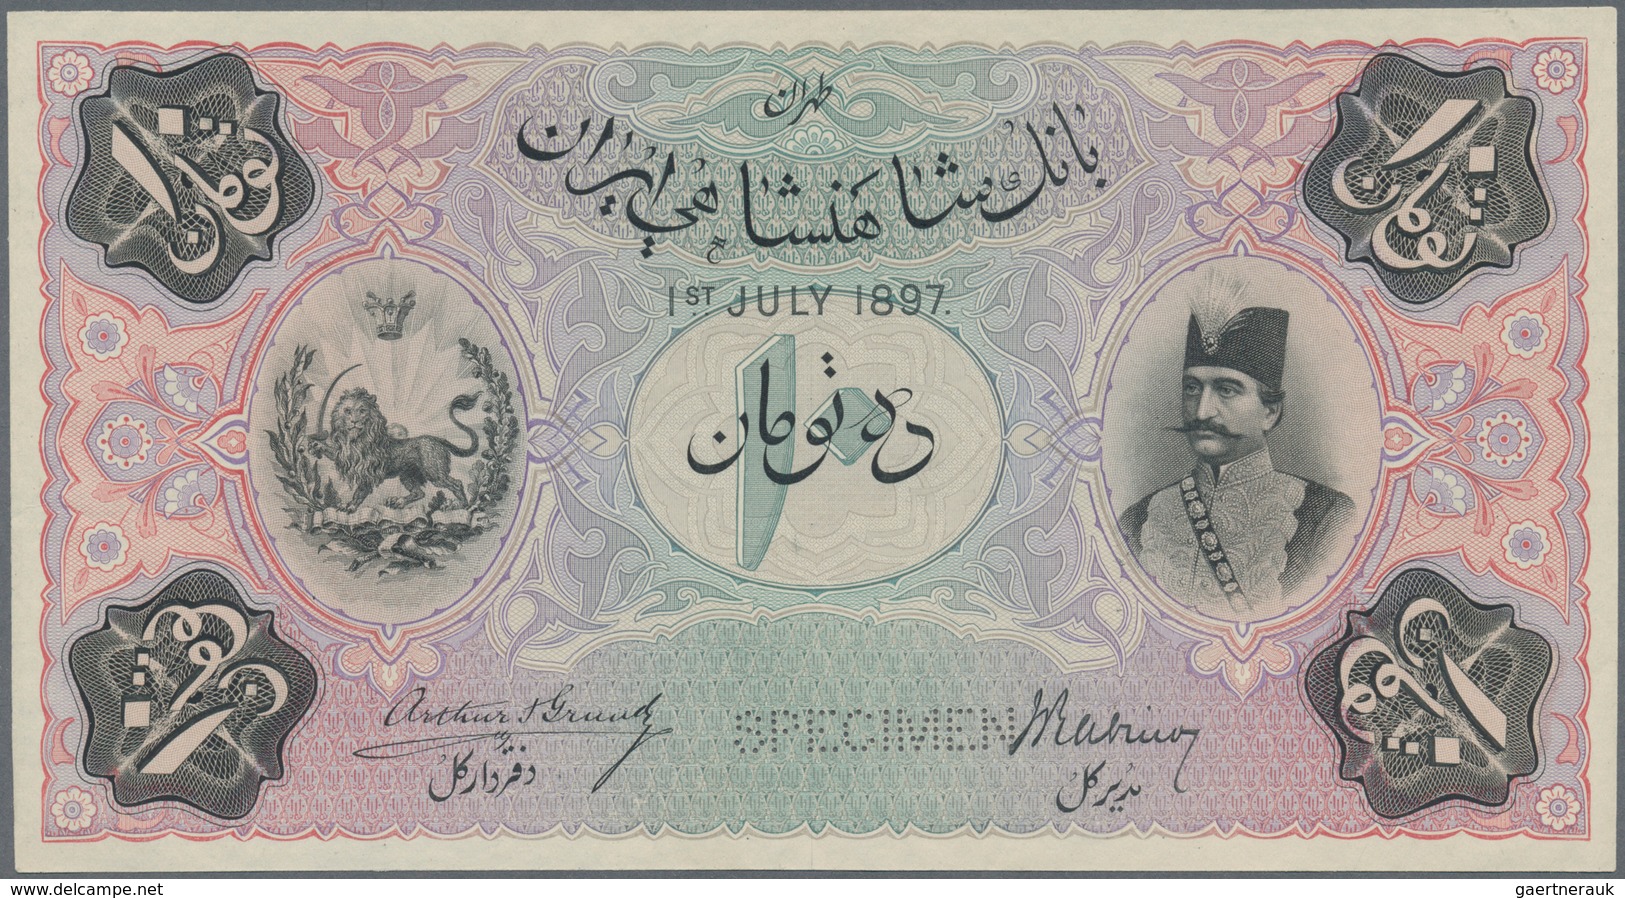 01787 Iran: Imperial Bank Of Persia Front And Reverse Specimen Of 10 Toman July 1st 1897, Printed By Bradb - Irán